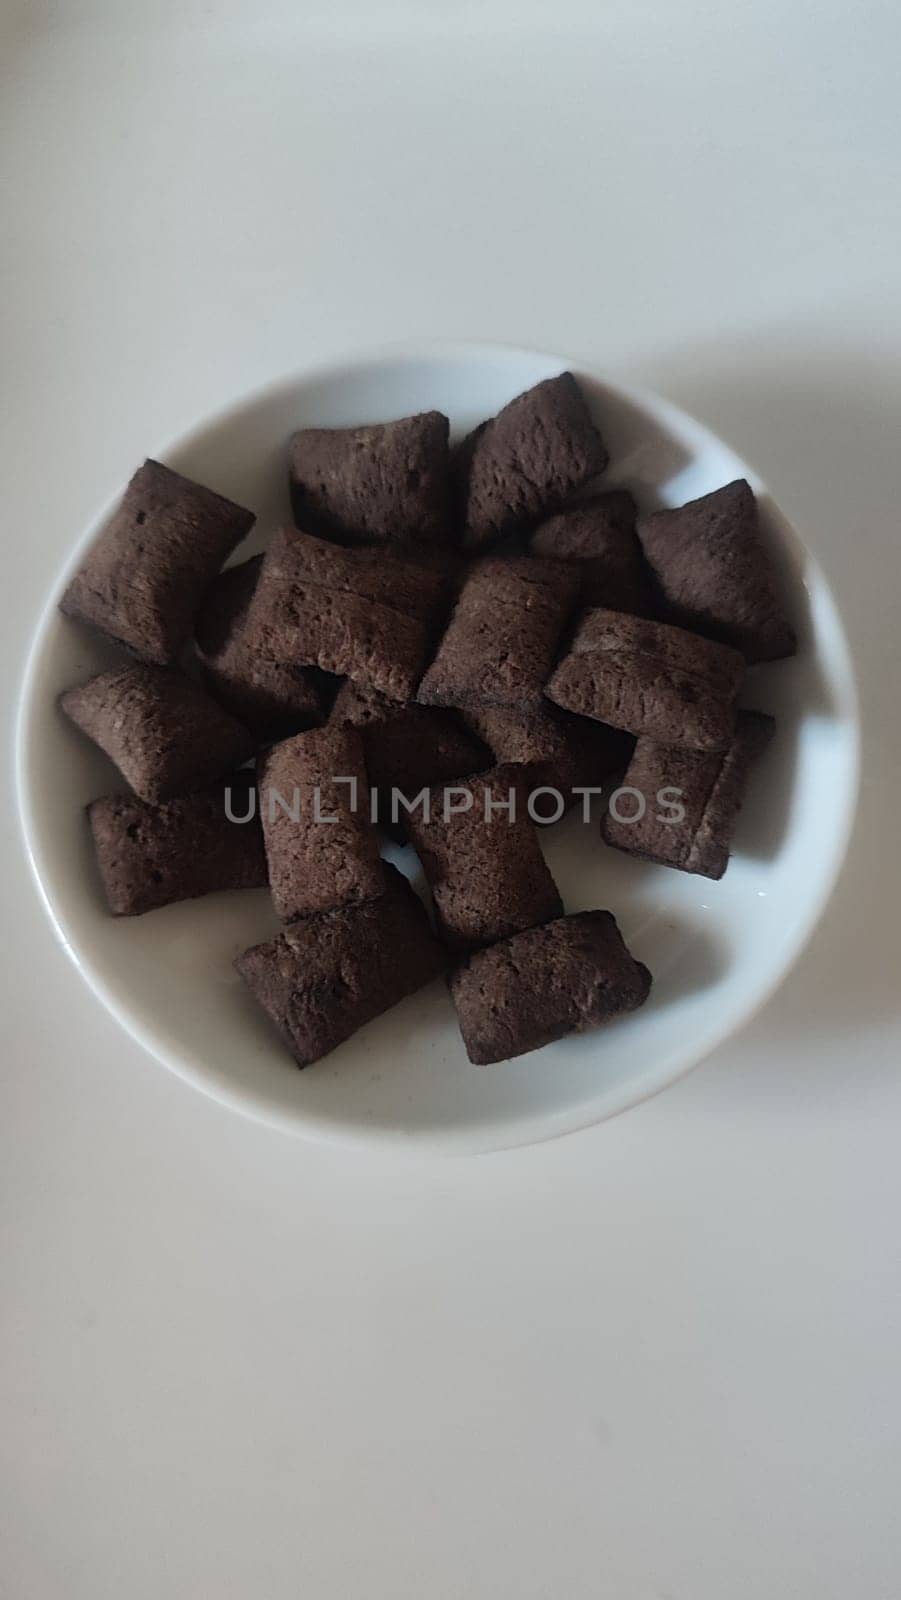 chocolate in a plate, honey dessert sweets. High quality photo